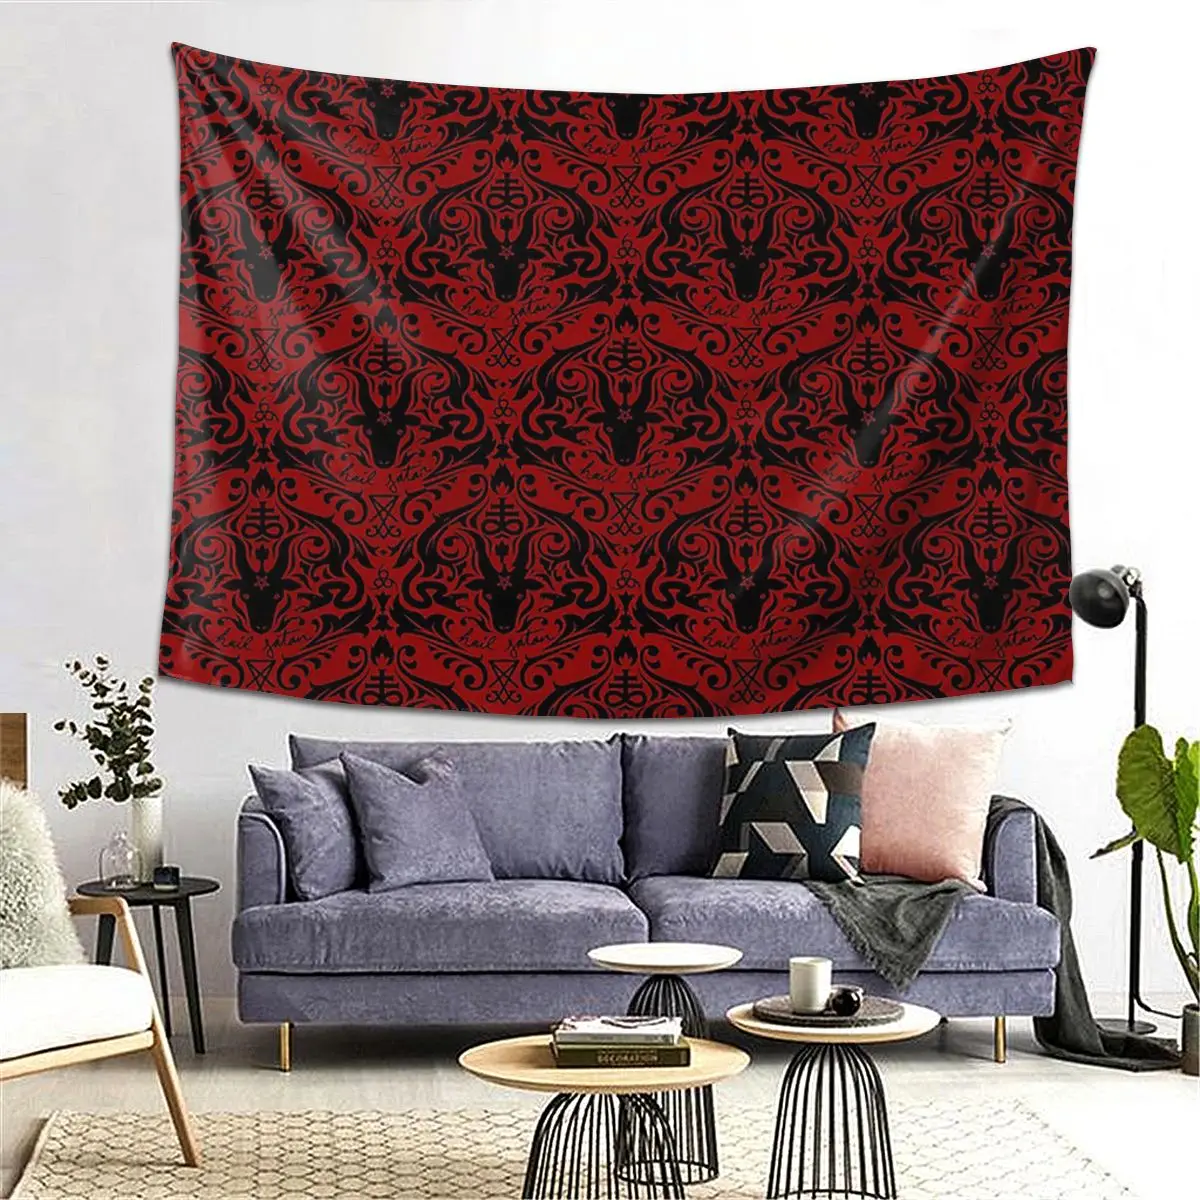 

Damask - Hail Satan (Black & Red Default) Aesthetic Home Decoration Tapestry Wall Hanging Tapestries for Living Room Dorm Room